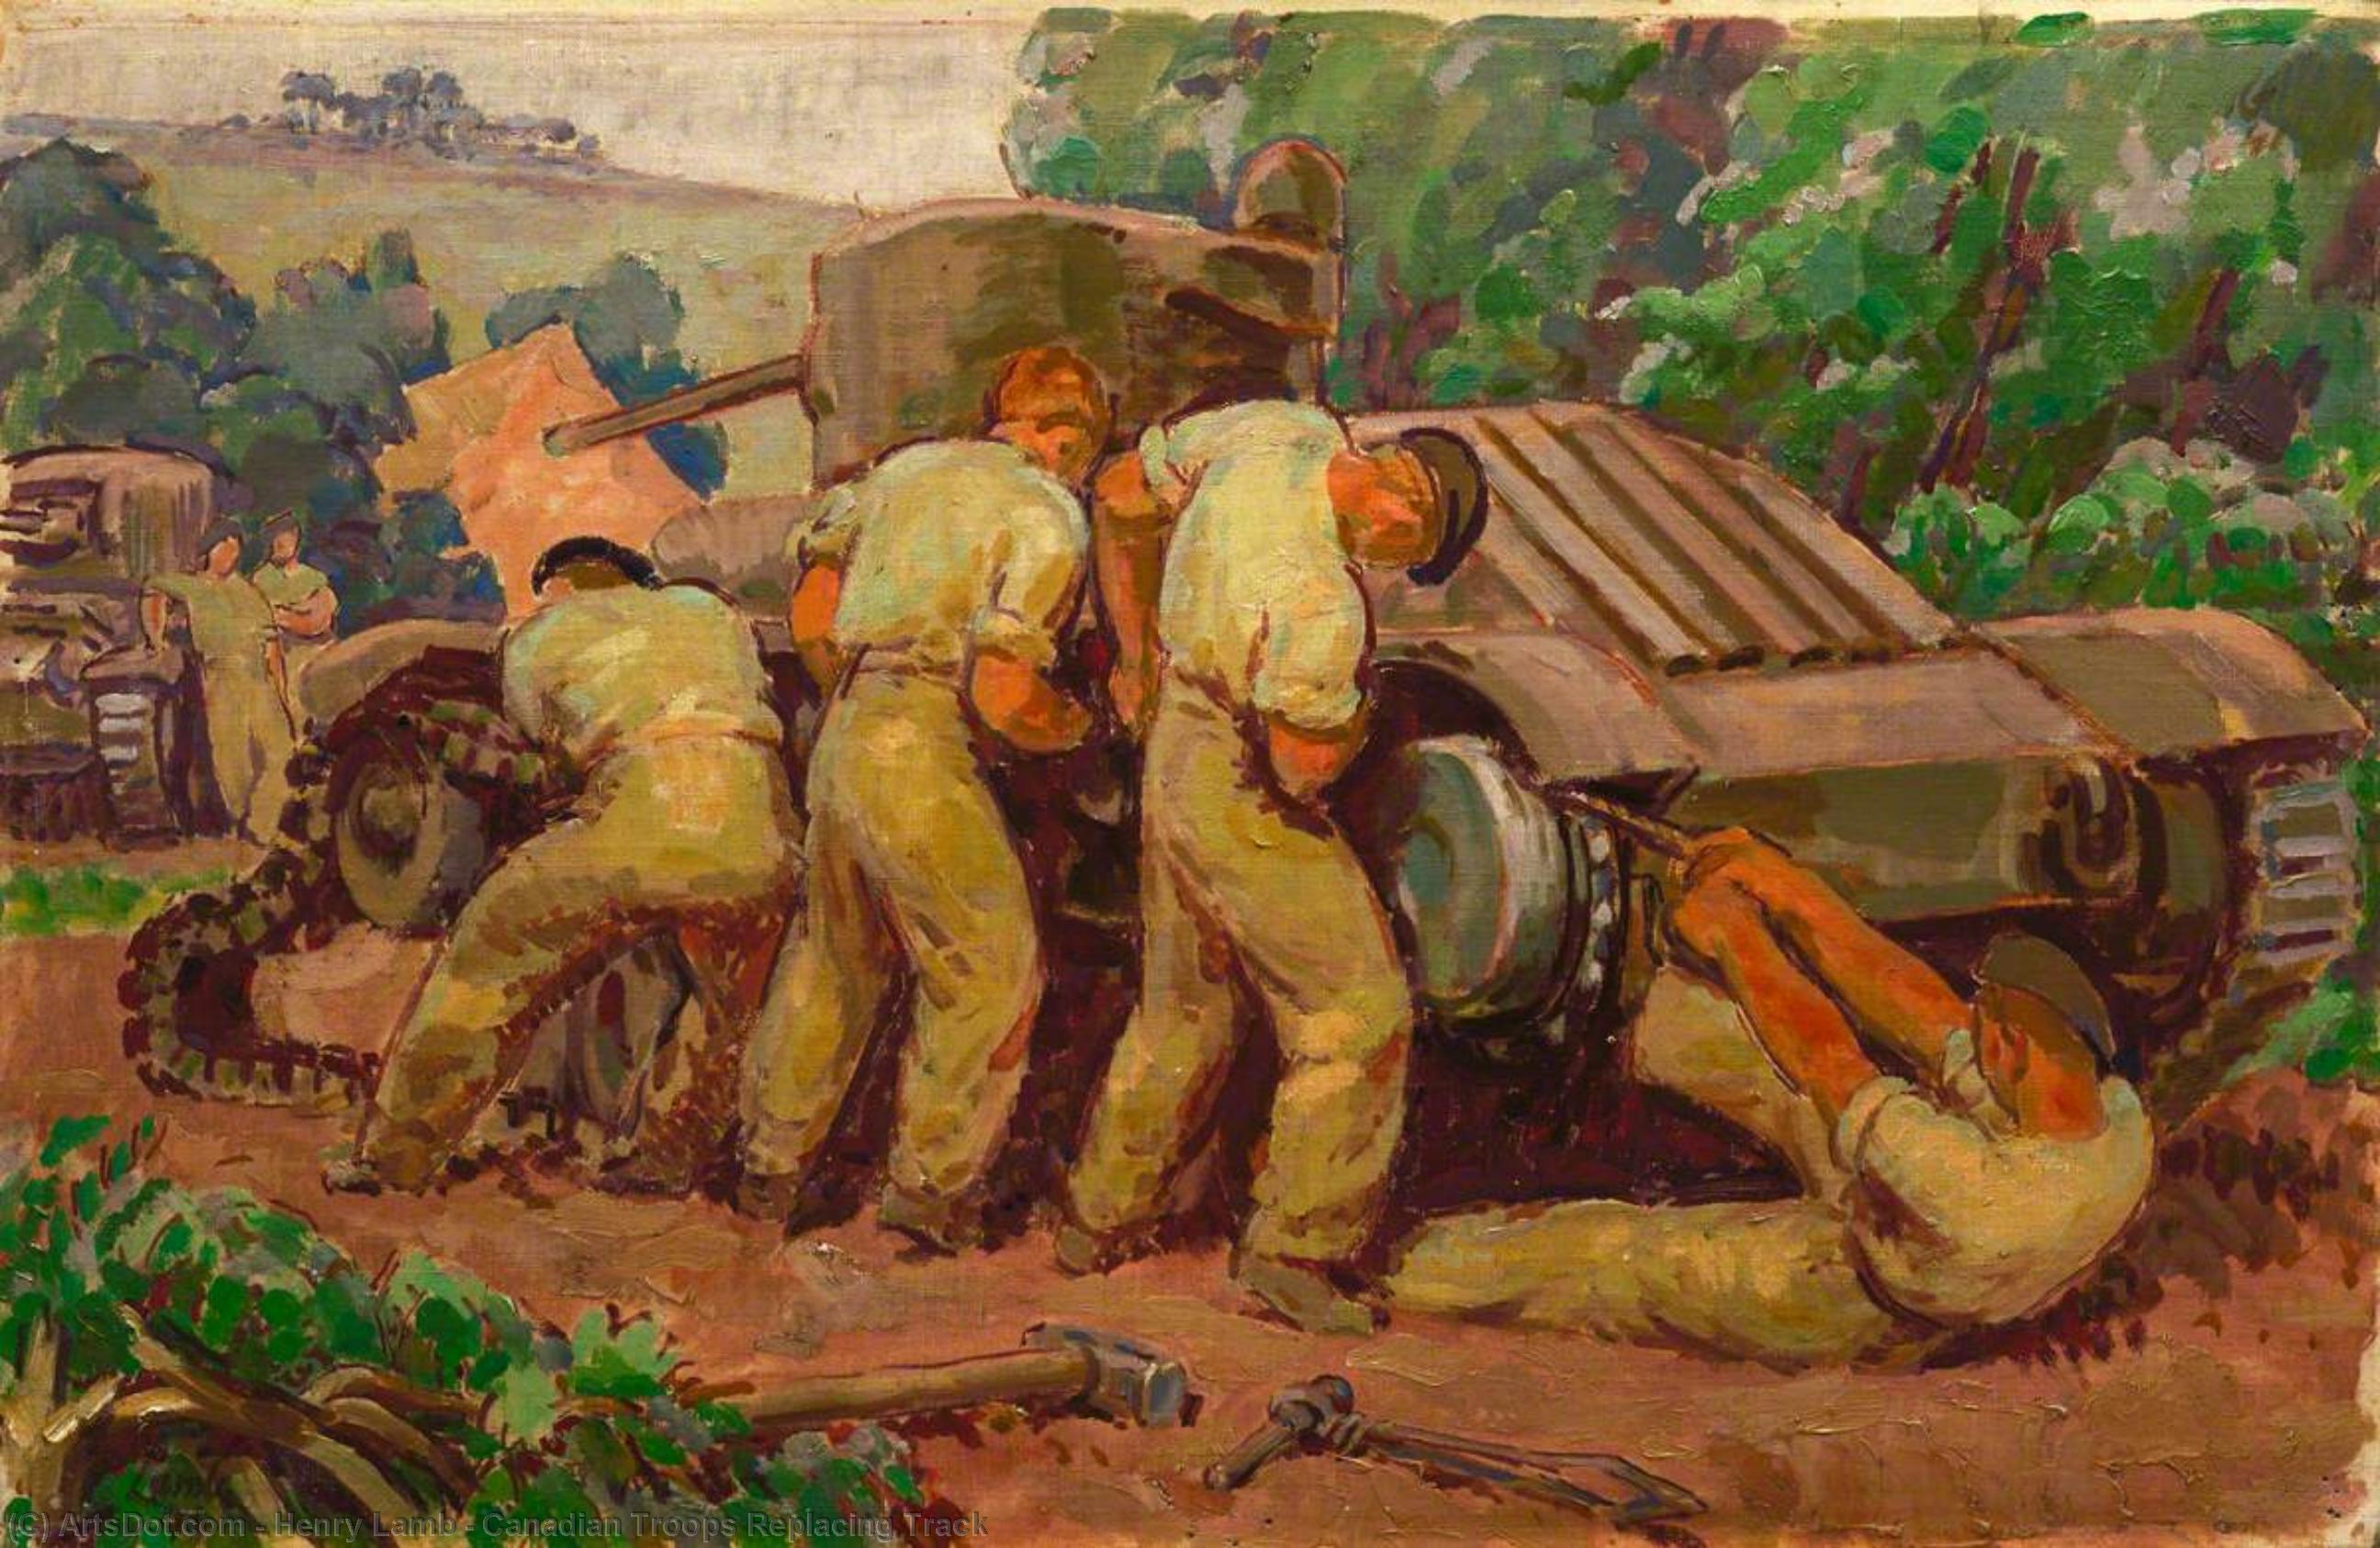 Buy Museum Art Reproductions Canadian Troops Replacing Track, 1941 by Henry Lamb (Inspired By) (1883-1960, Australia) | ArtsDot.com